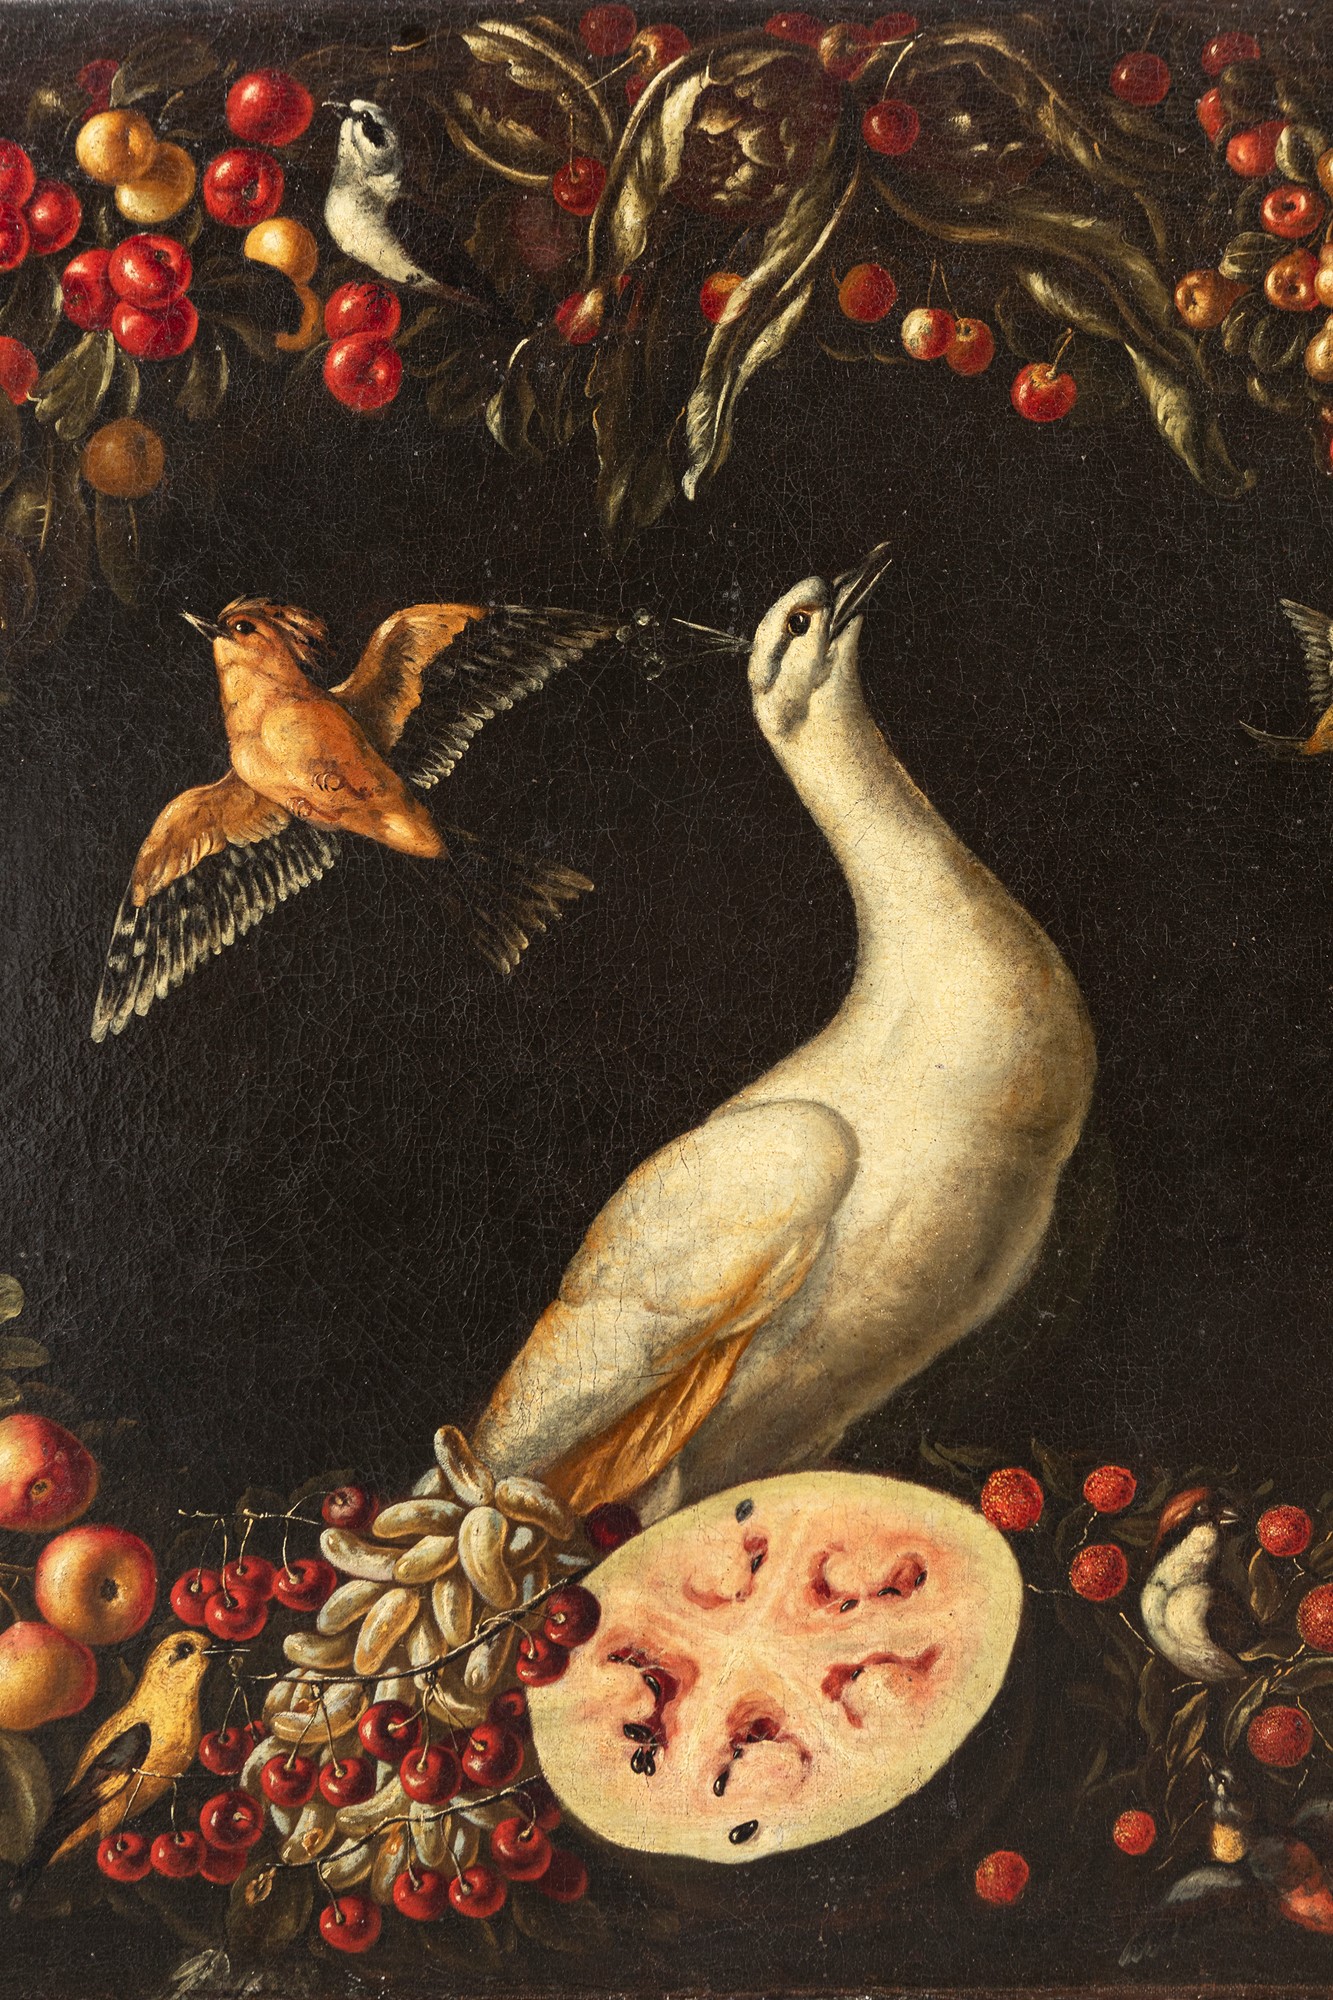 Neapolitan school, XVII century - Garland of fruit and vegetables with white peacock and other birds - Image 6 of 7